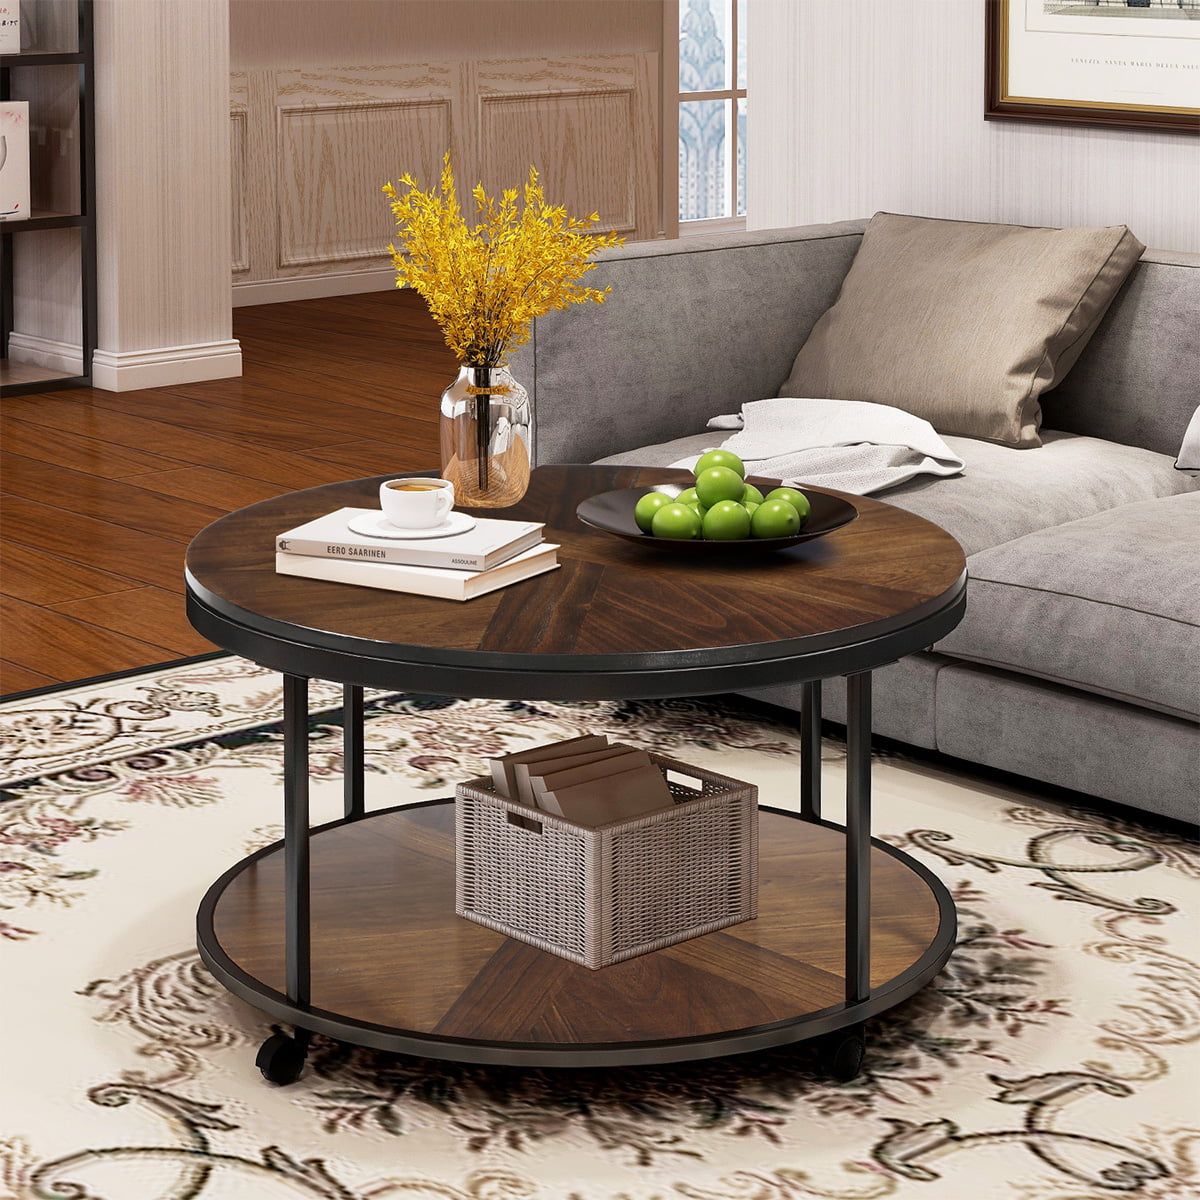 Sentern Round Coffee Table With Caster Wheels And Unique Textured Inside Round Coffee Tables (View 3 of 15)